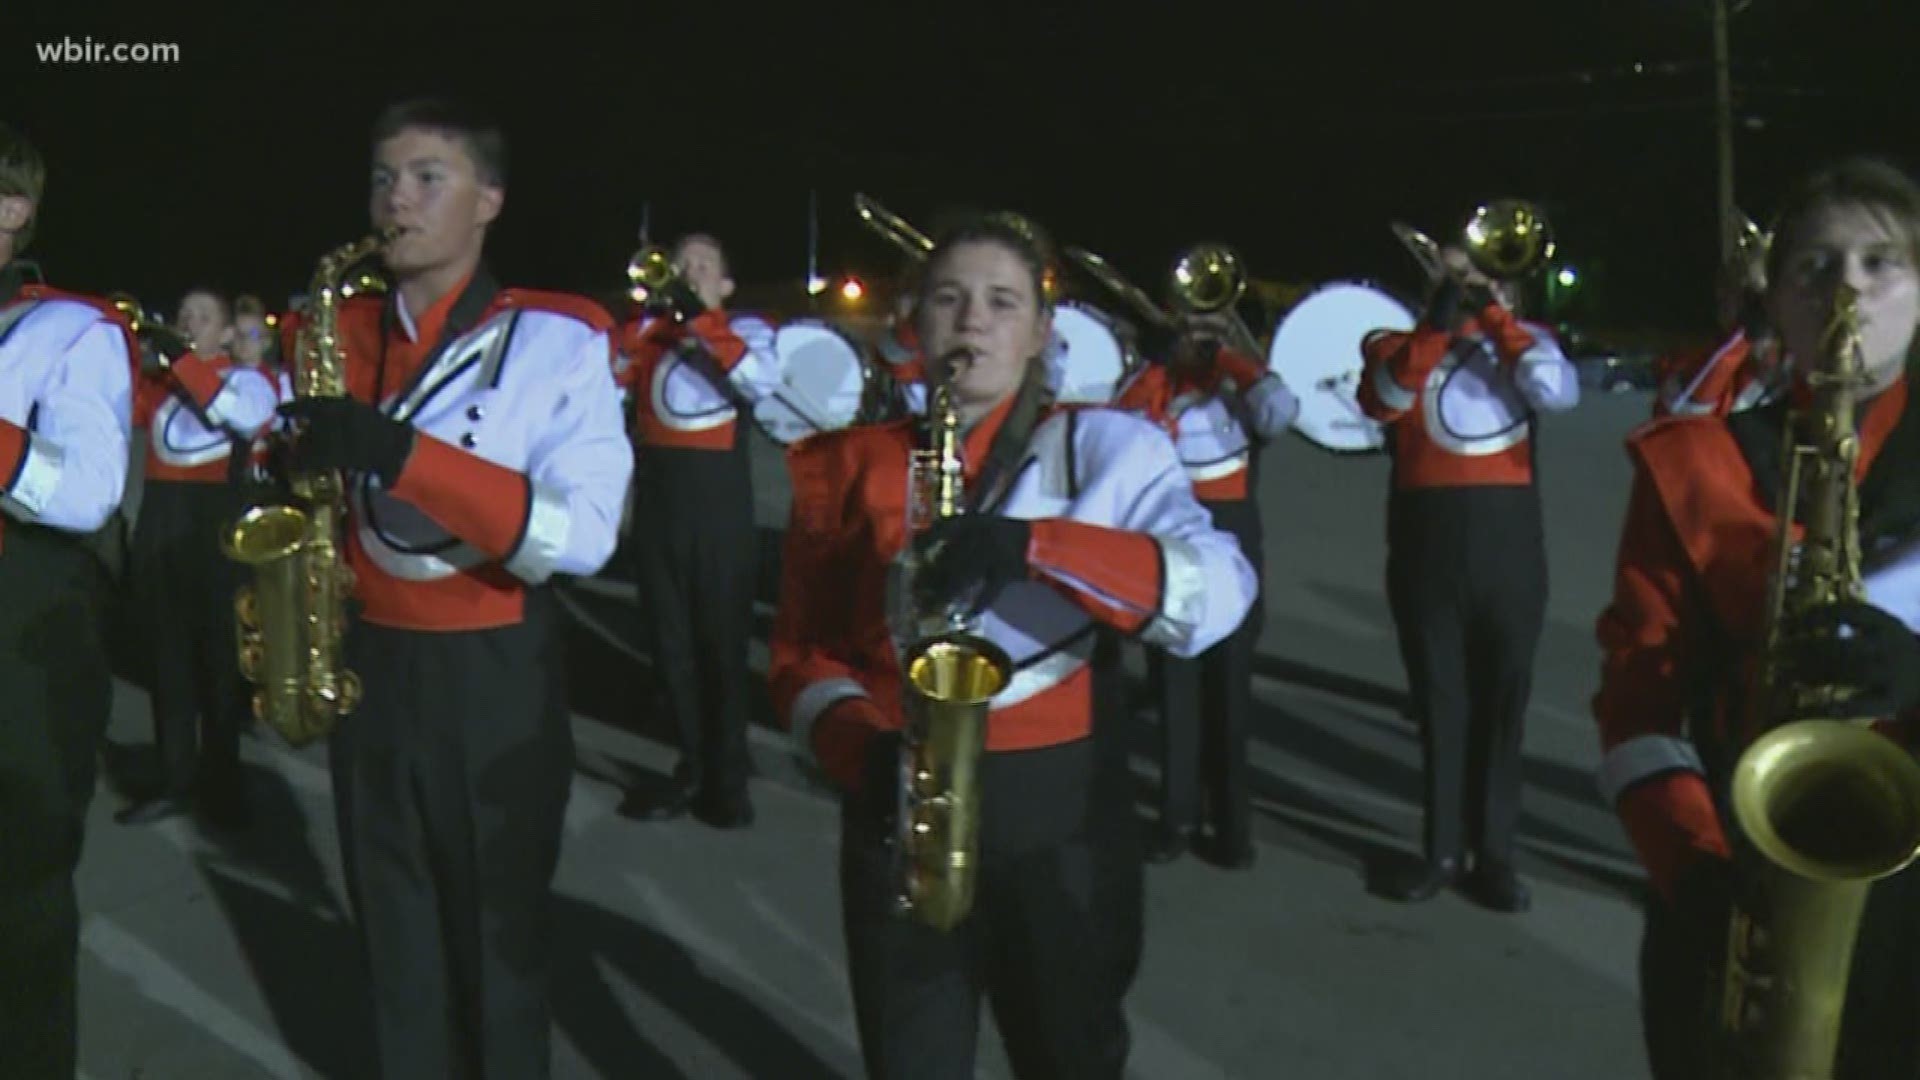 Watch and listen to the sounds of the Clinton High School Band.